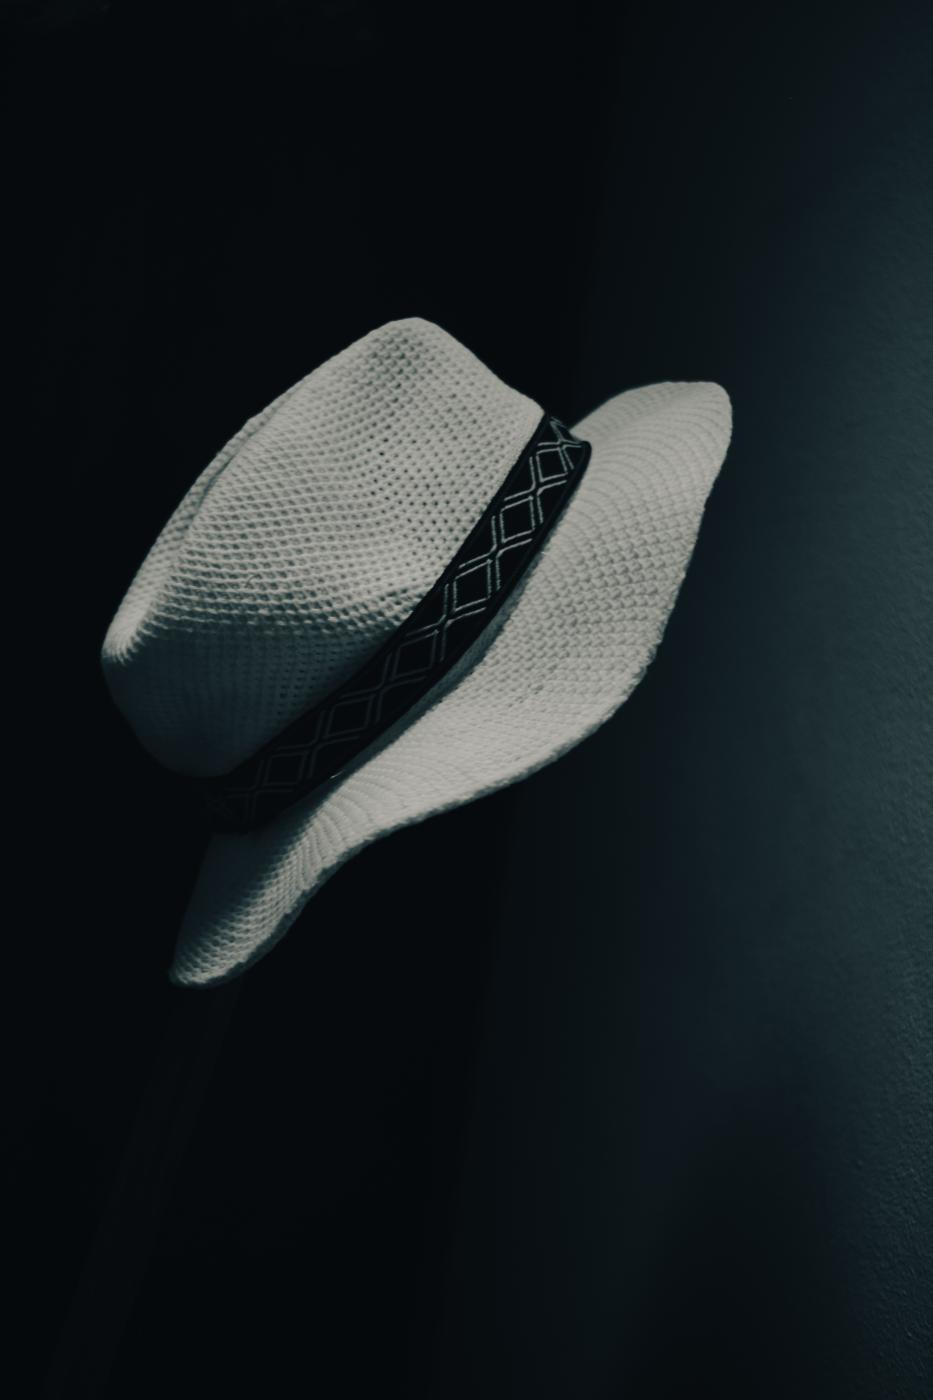 The hat | Buy this image